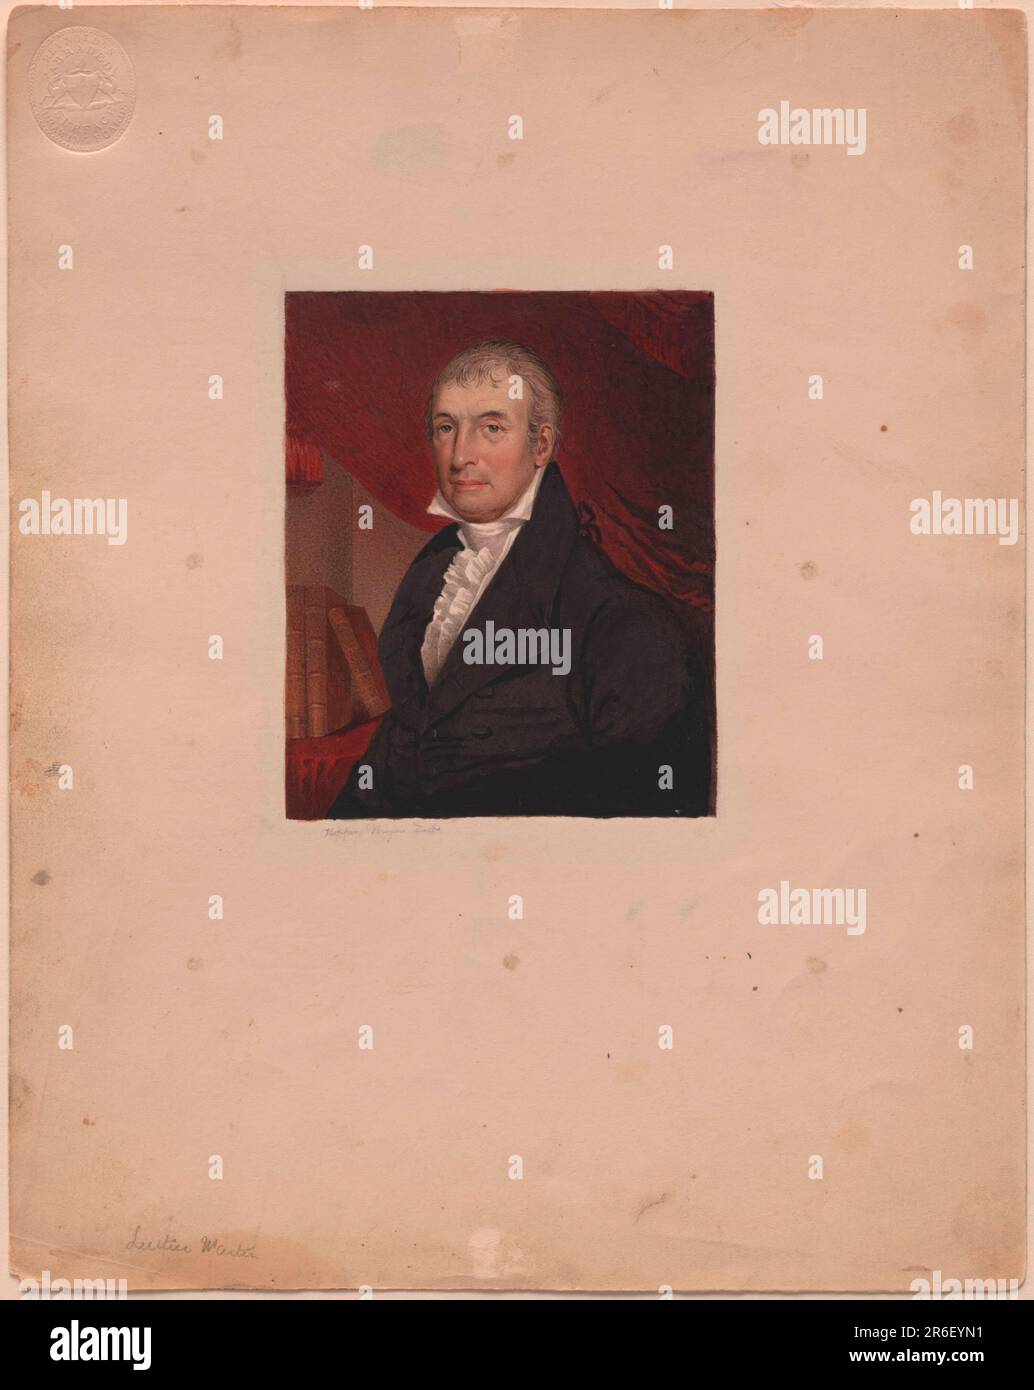 Luther Martin. Date: c. 1835. Watercolor with glaze over pencil on paper. Museum: NATIONAL PORTRAIT GALLERY. Stock Photo